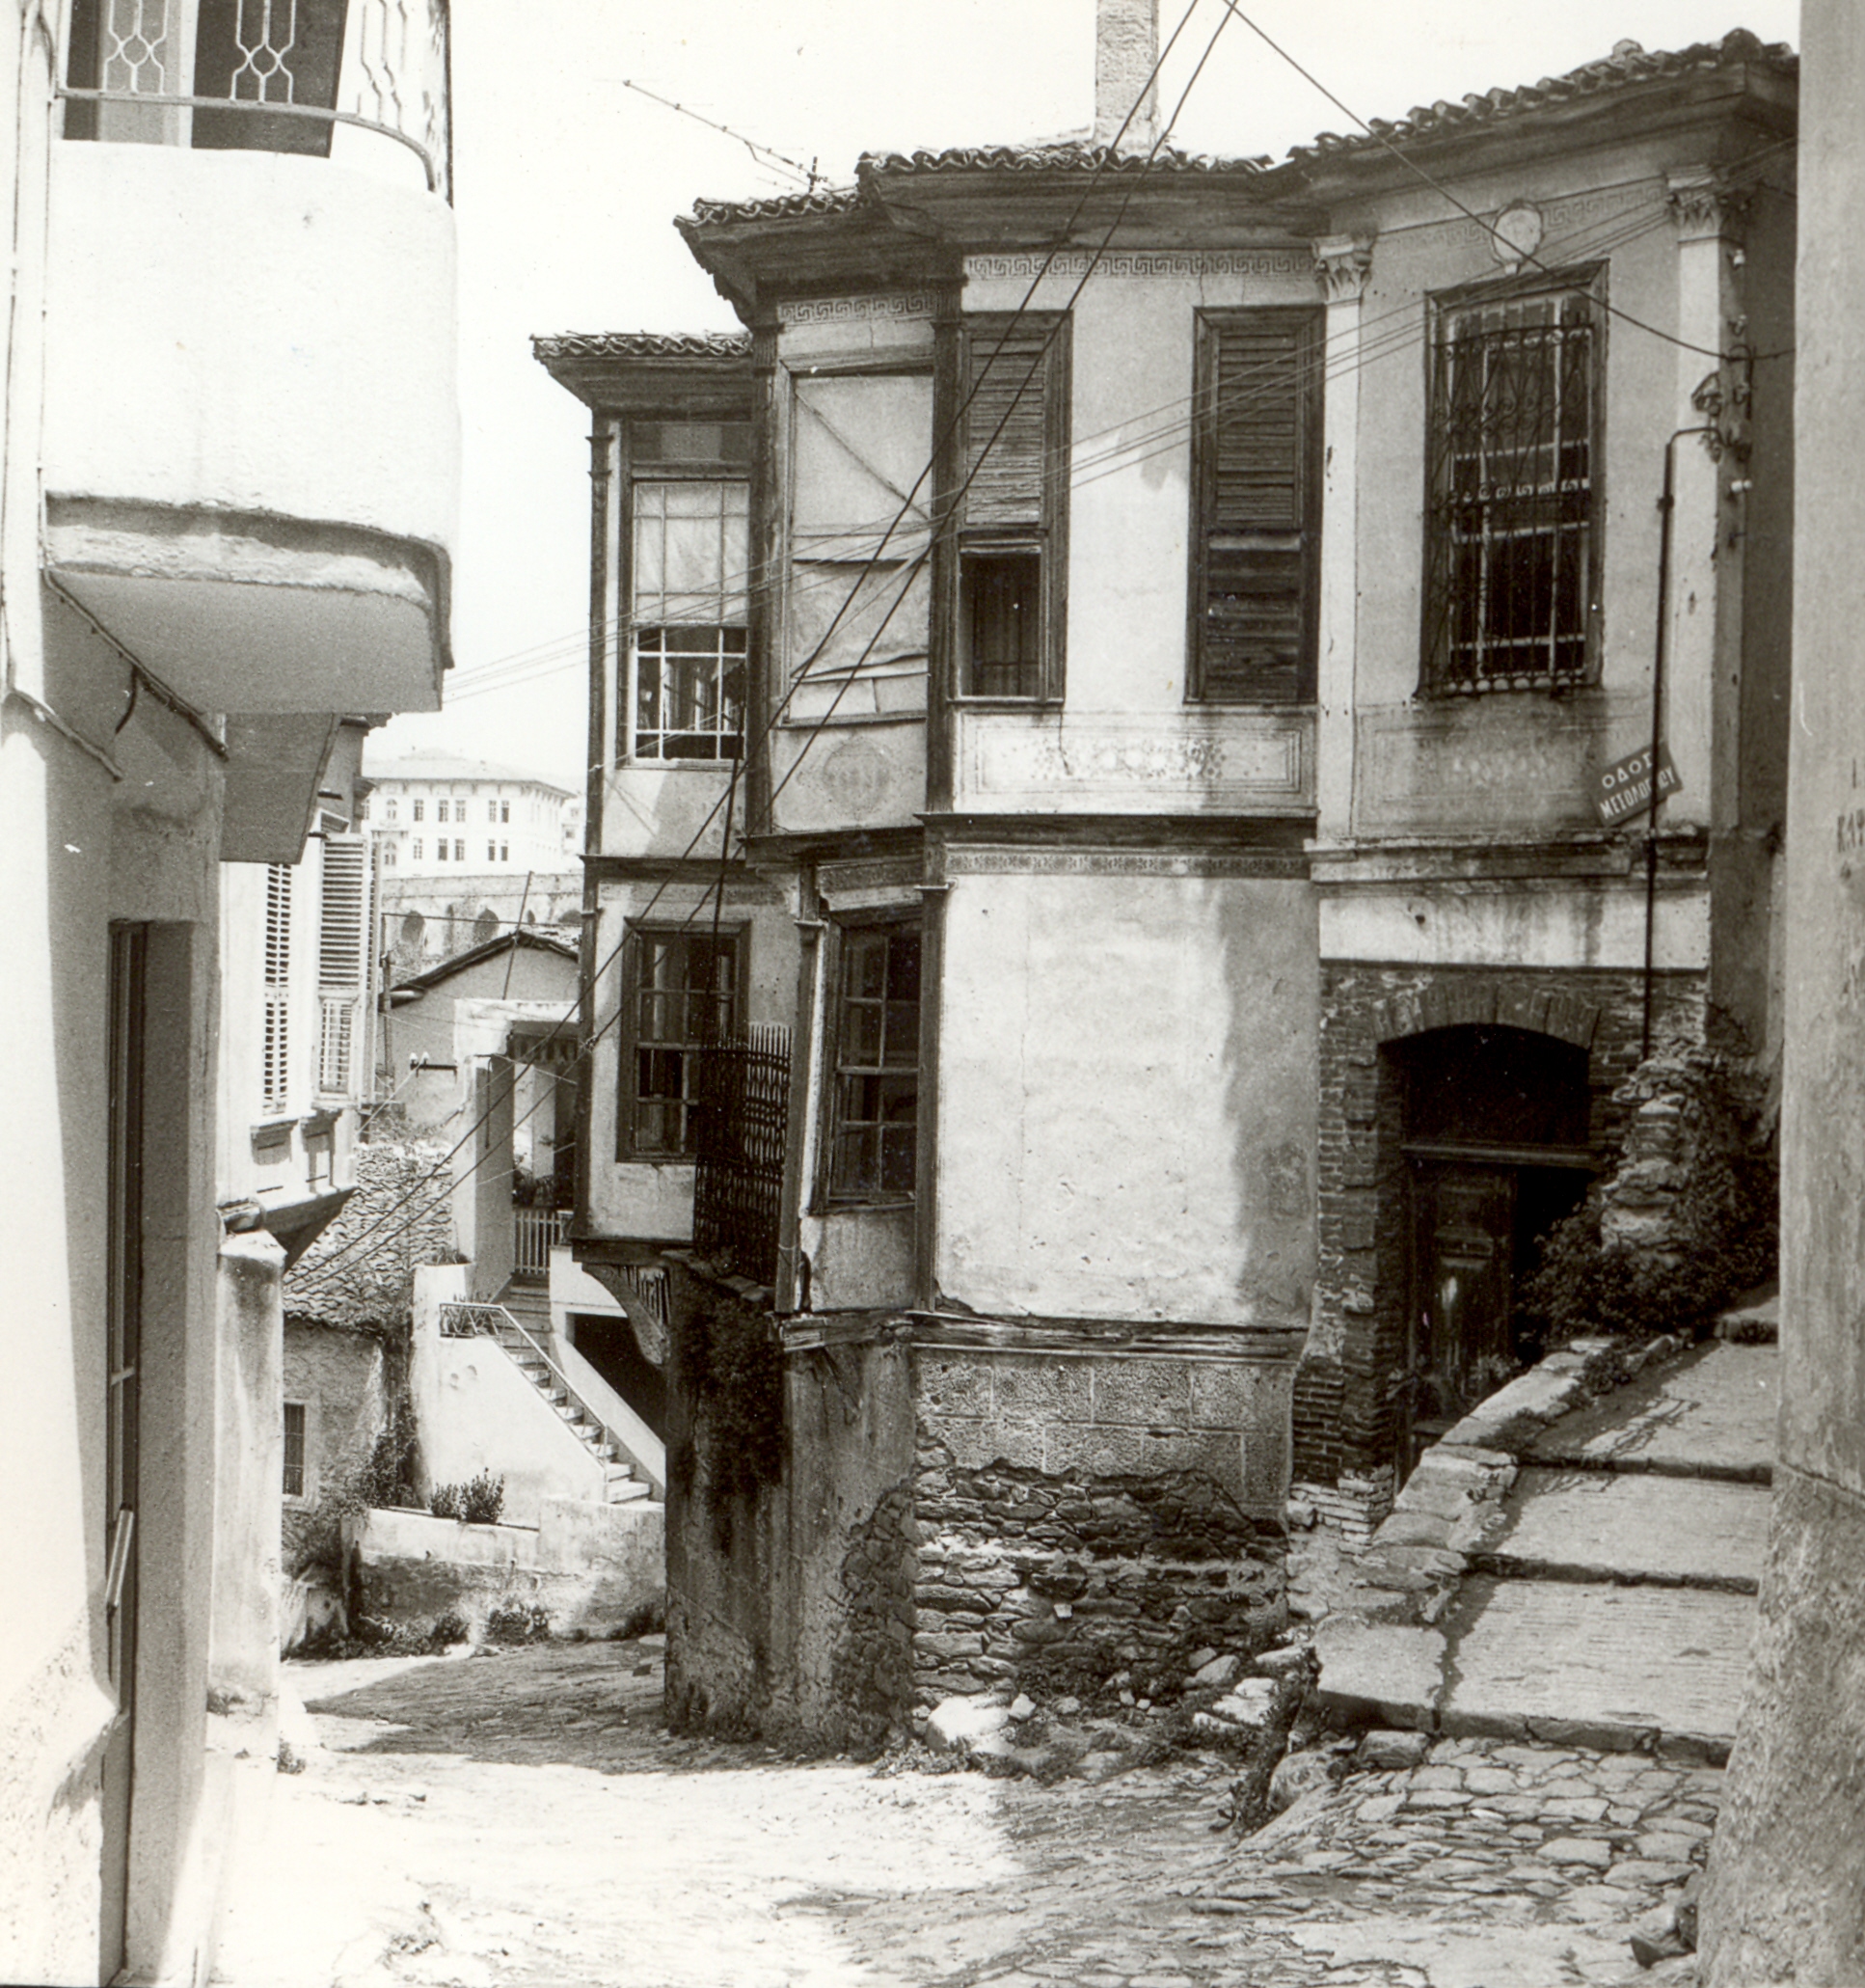 Image 'Restoration of Houses in the Panaghia Area, Kavala'